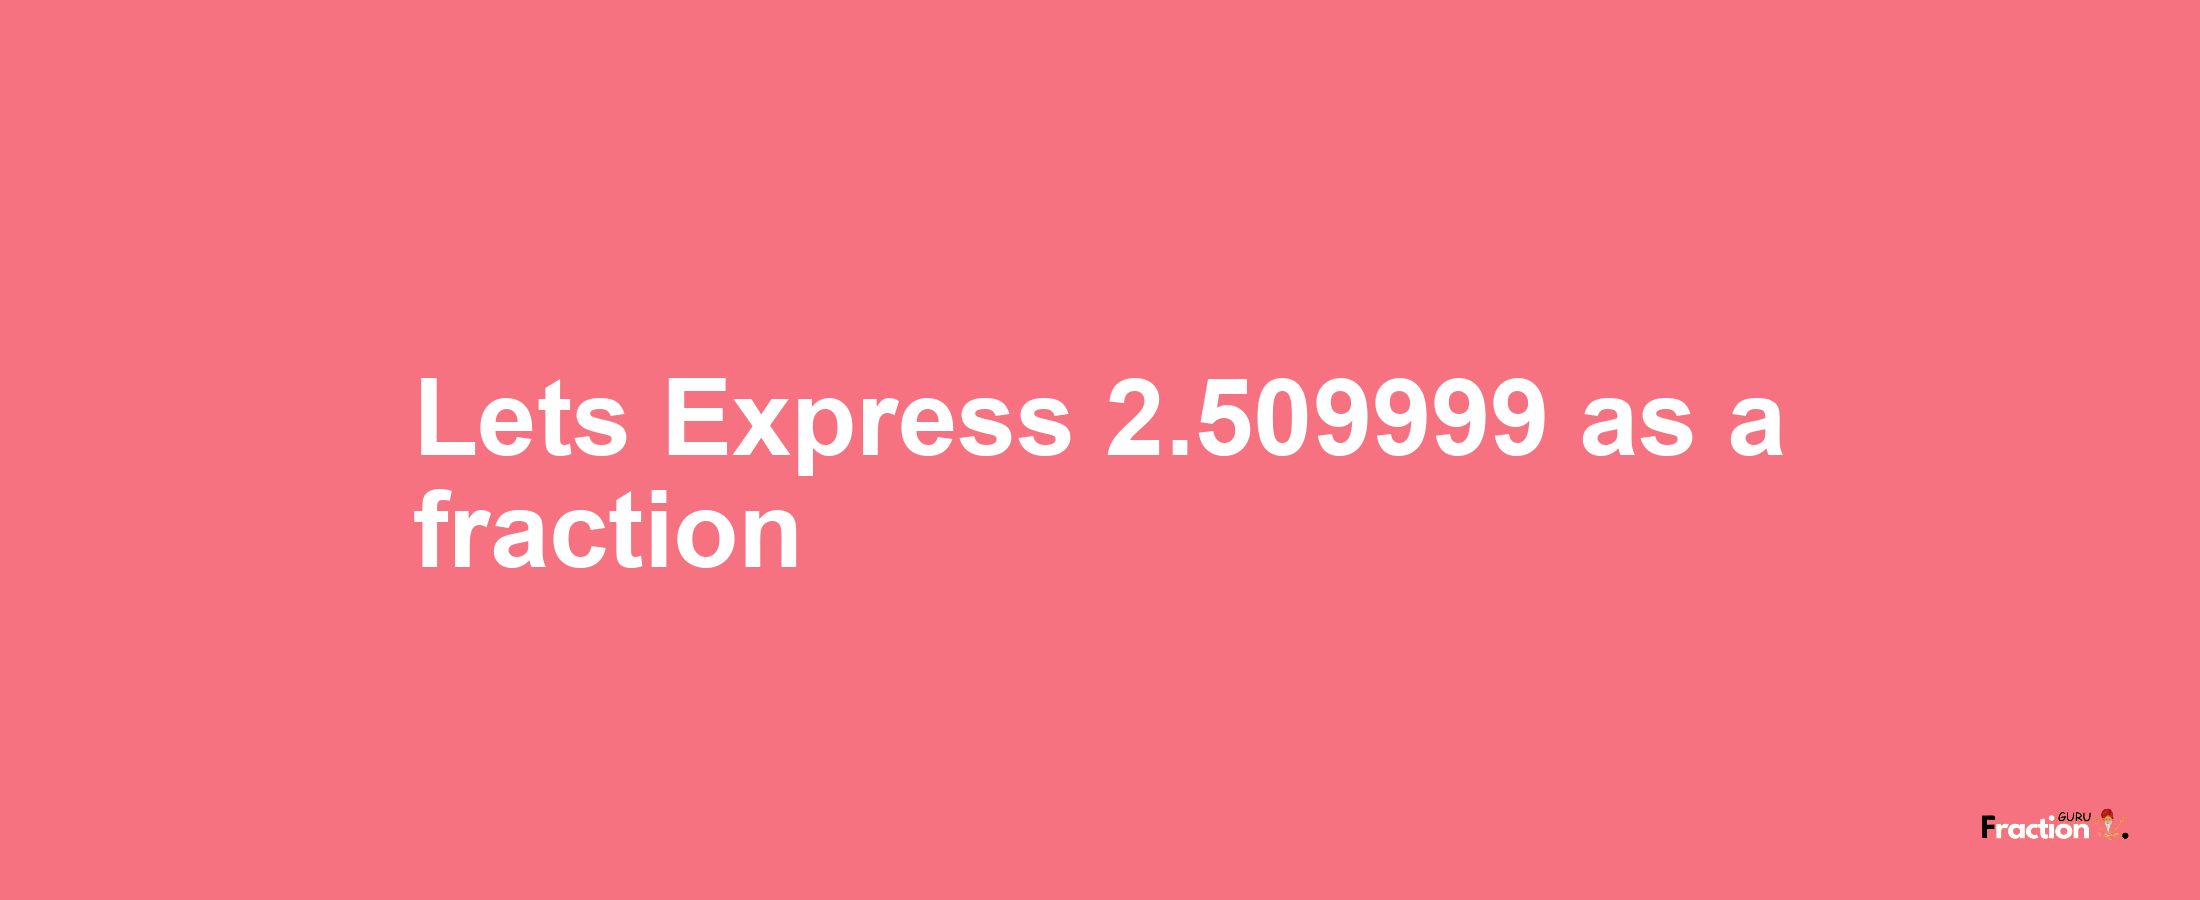 Lets Express 2.509999 as afraction